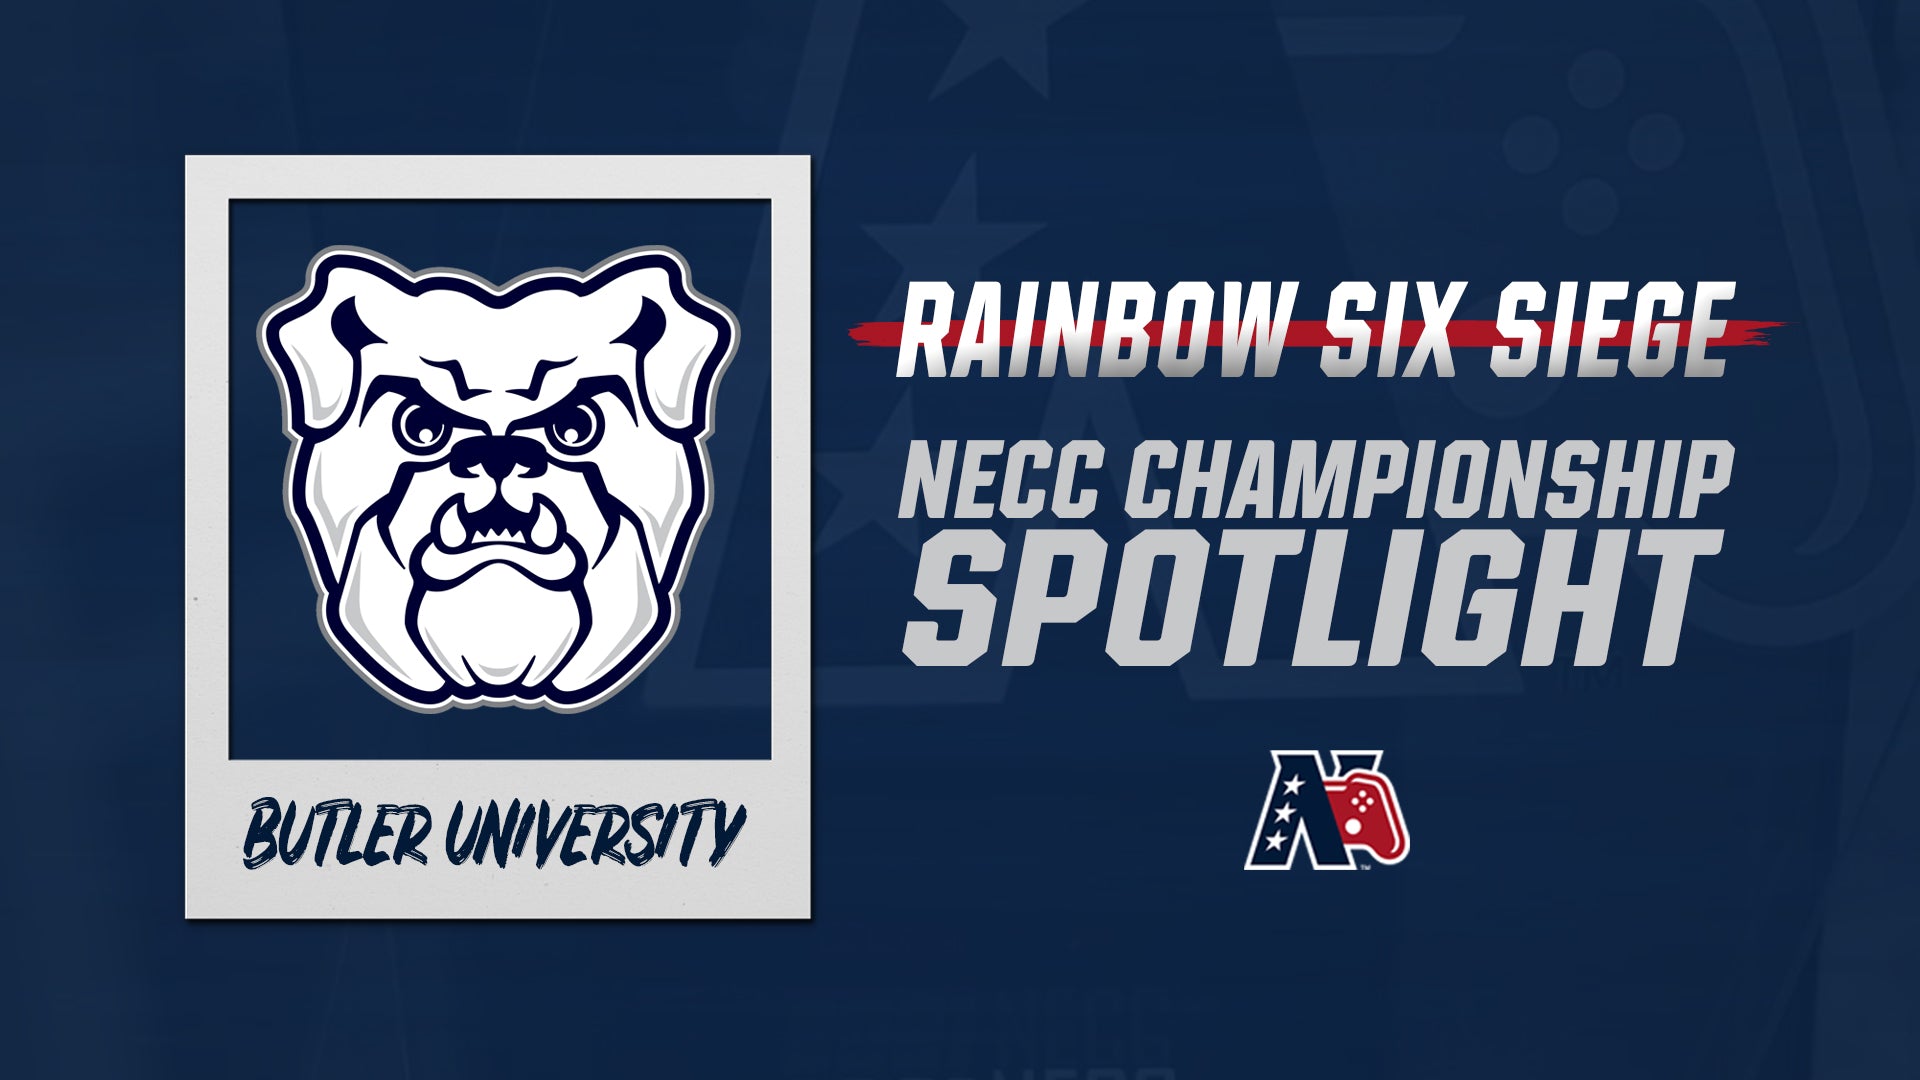 Butler University: Clutching the Siege Challengers Division